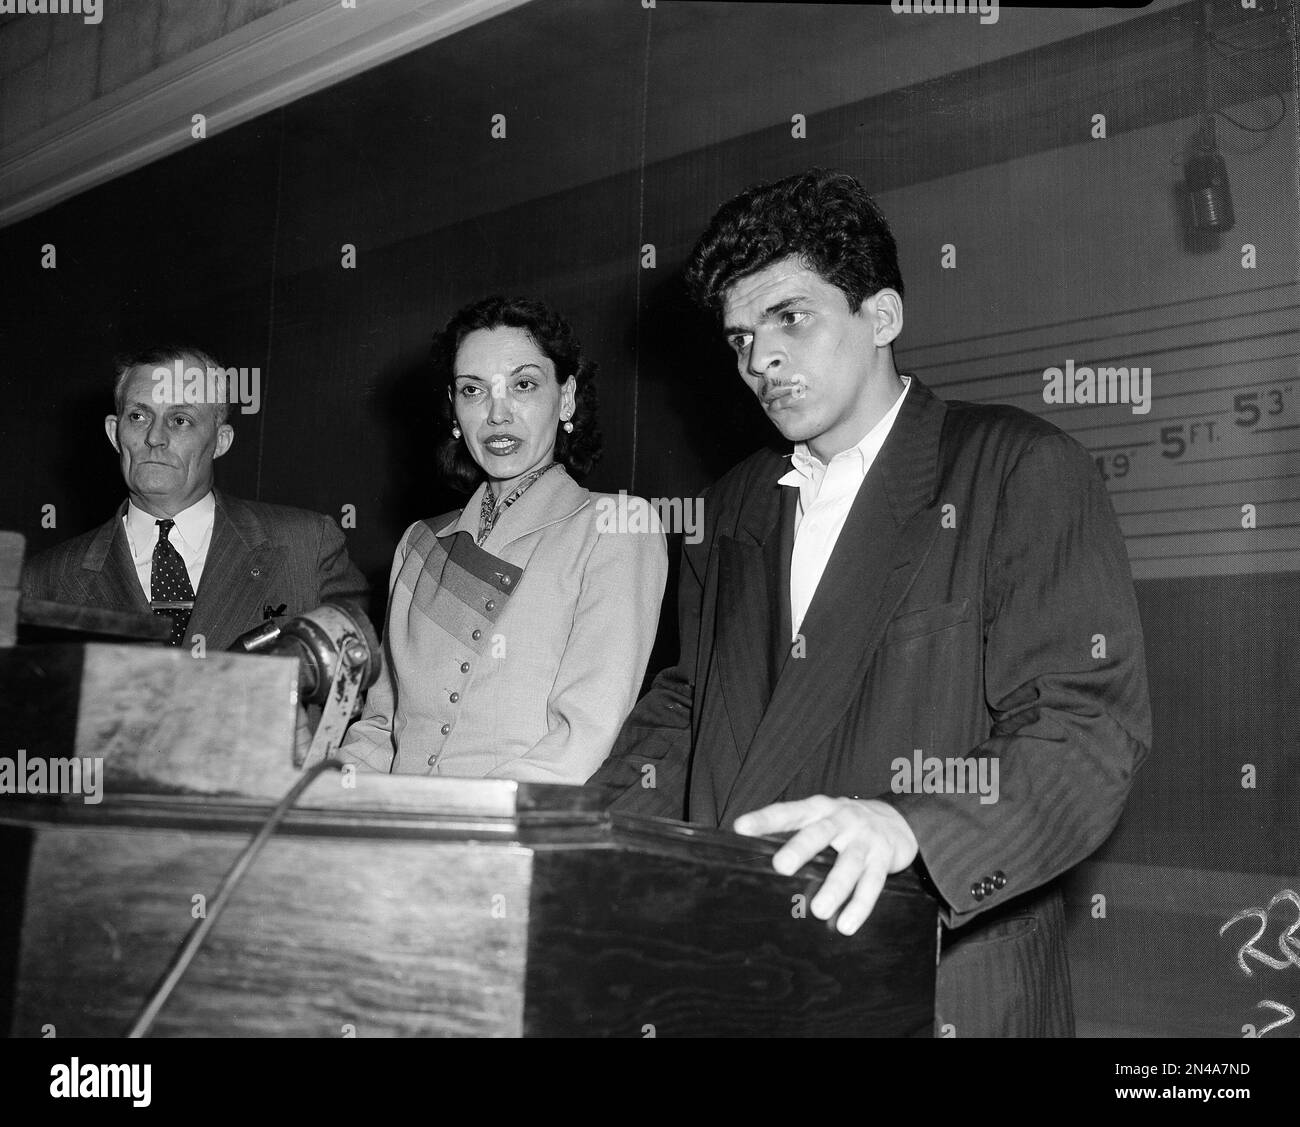 Lolita Lebron, center, one of four Puerto Rican nationalist extremists held  on $100,000 bail after an assault on the U.S. House of Representatives,  speaks to newsmen at police headquarters in Washington, D.C.,